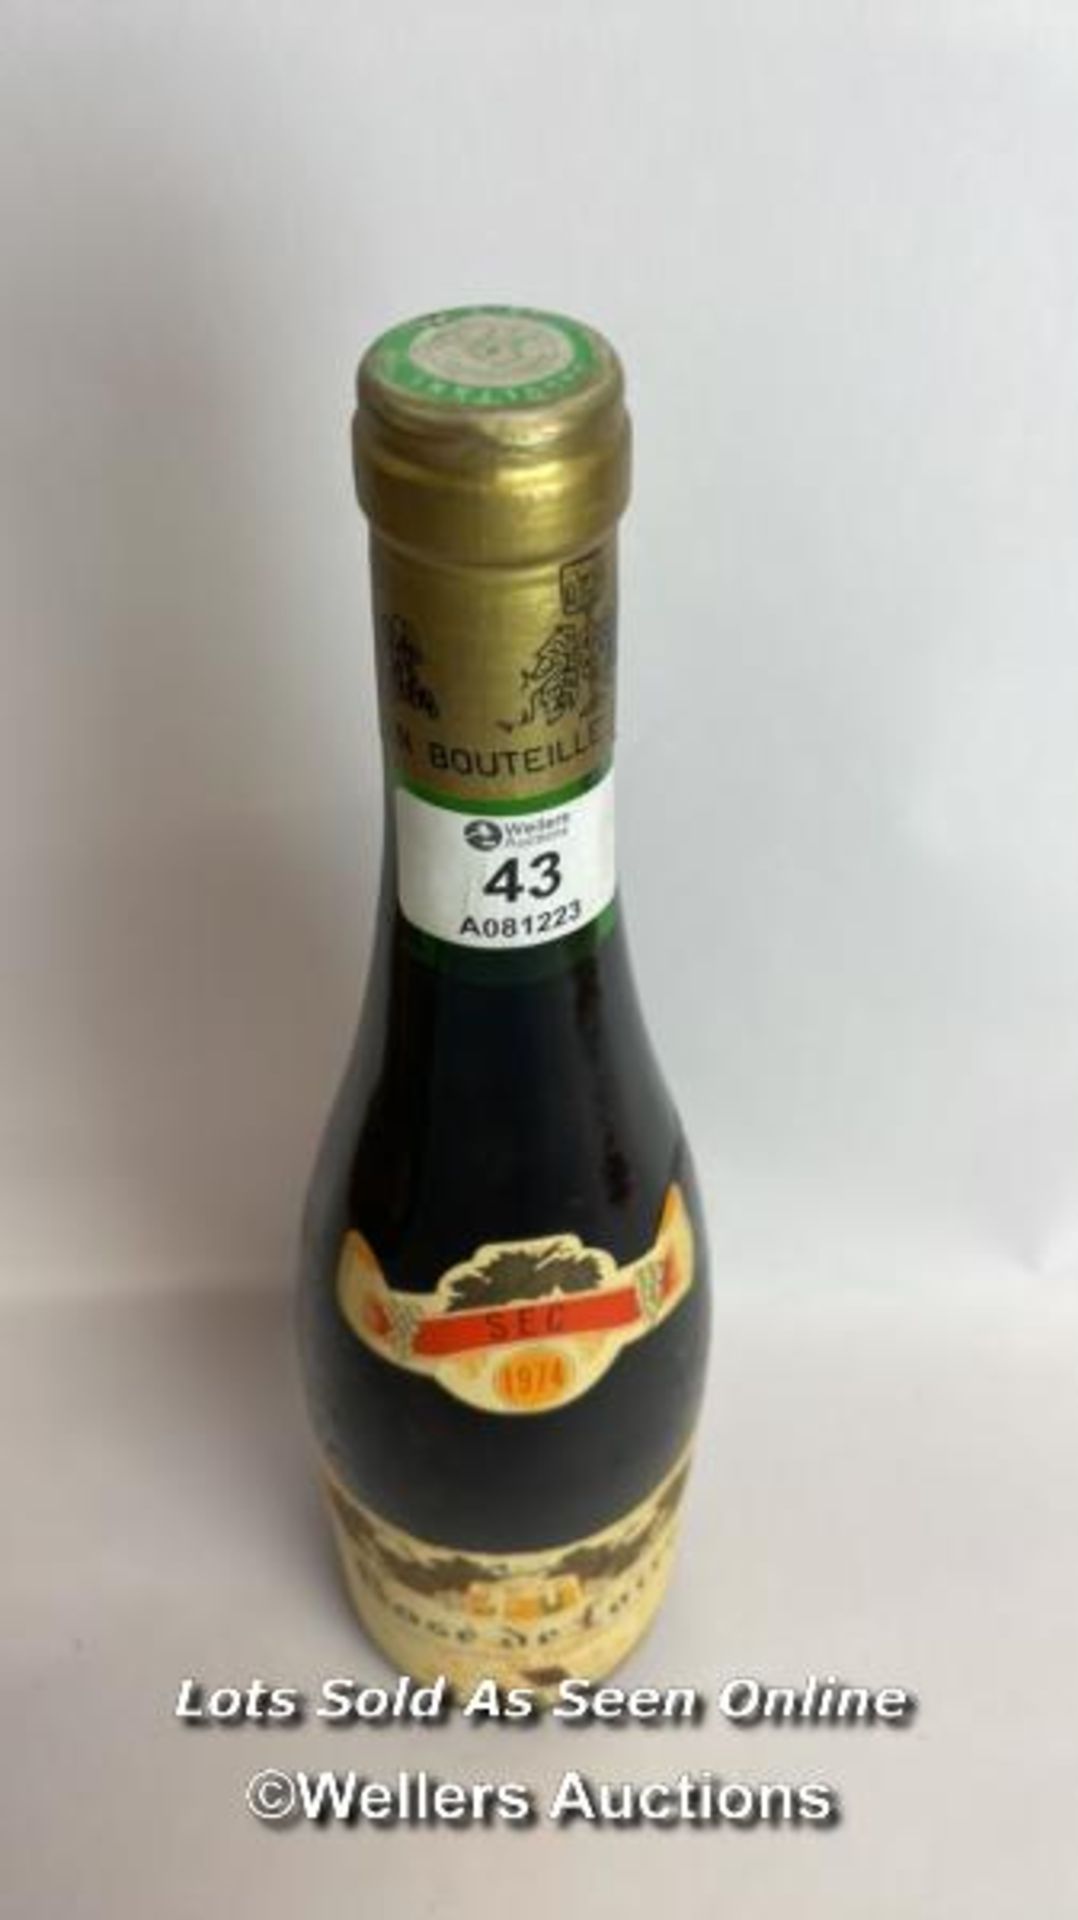 1974 Rose De Loire, 73cl, No vol indicated / Please see images for fill level and general condition. - Image 6 of 7